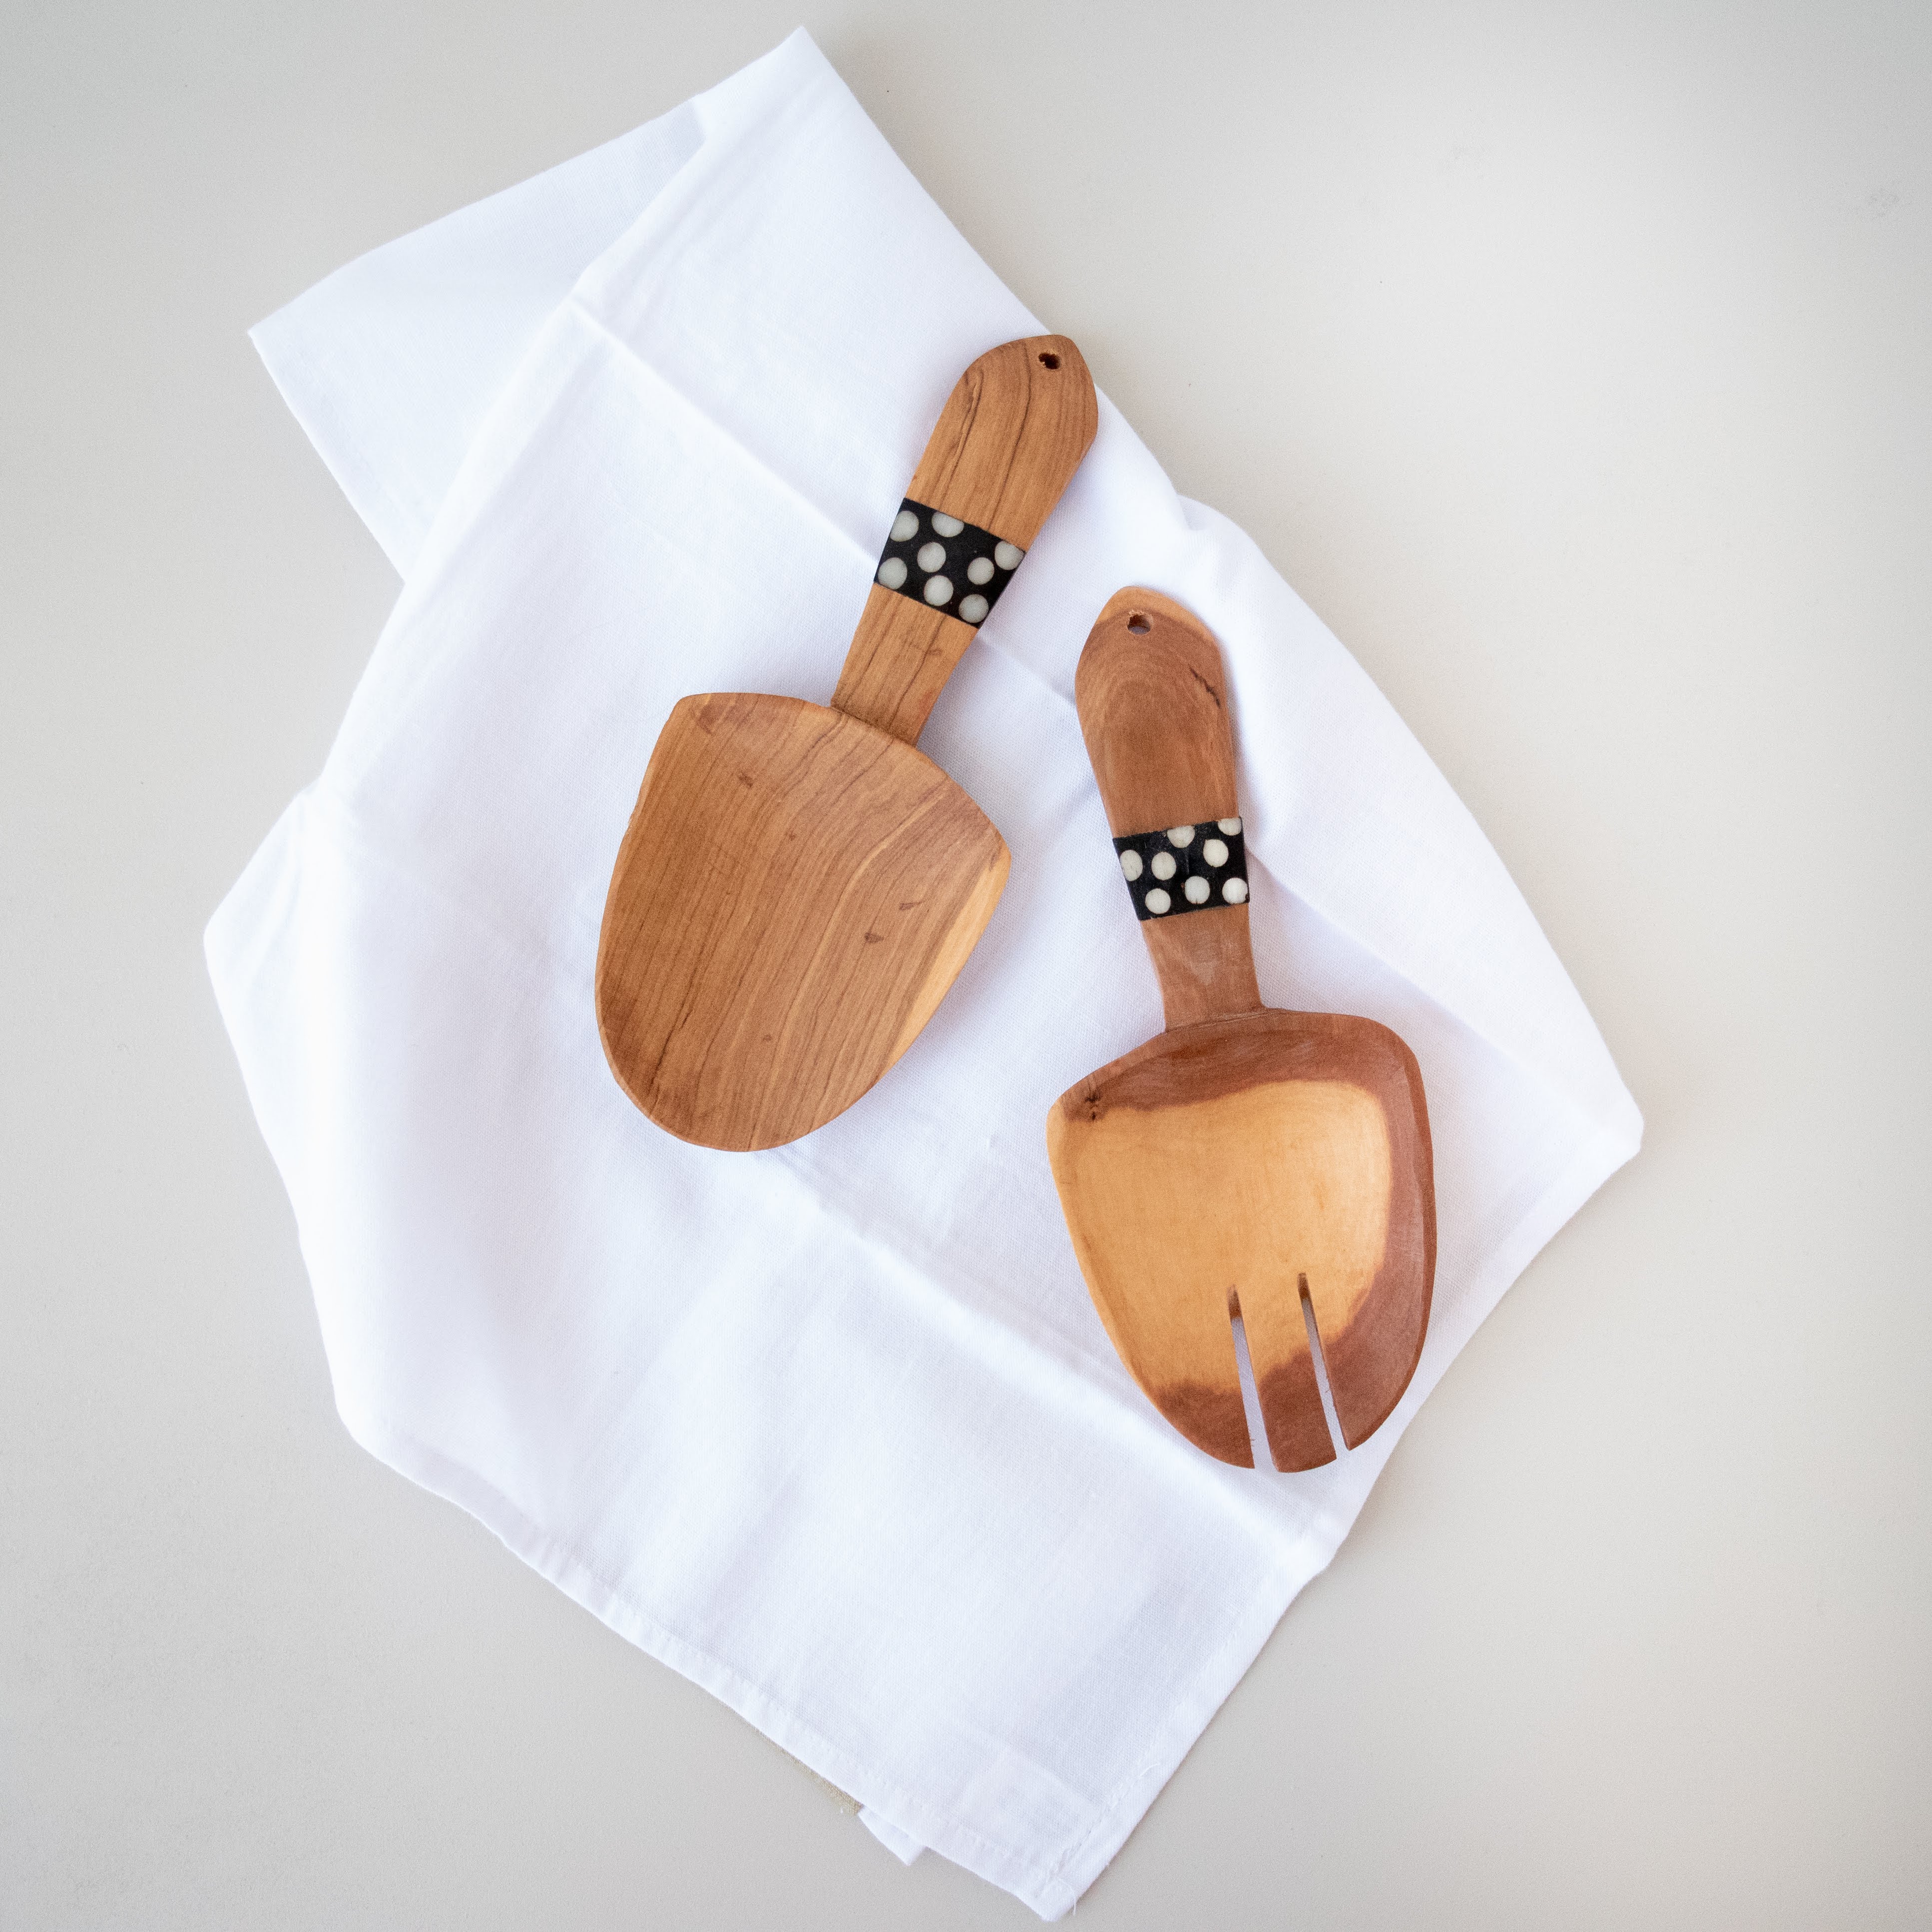 Olivewood & Bone Short Spoon Set - Kenyan materials and design for a fair trade boutique